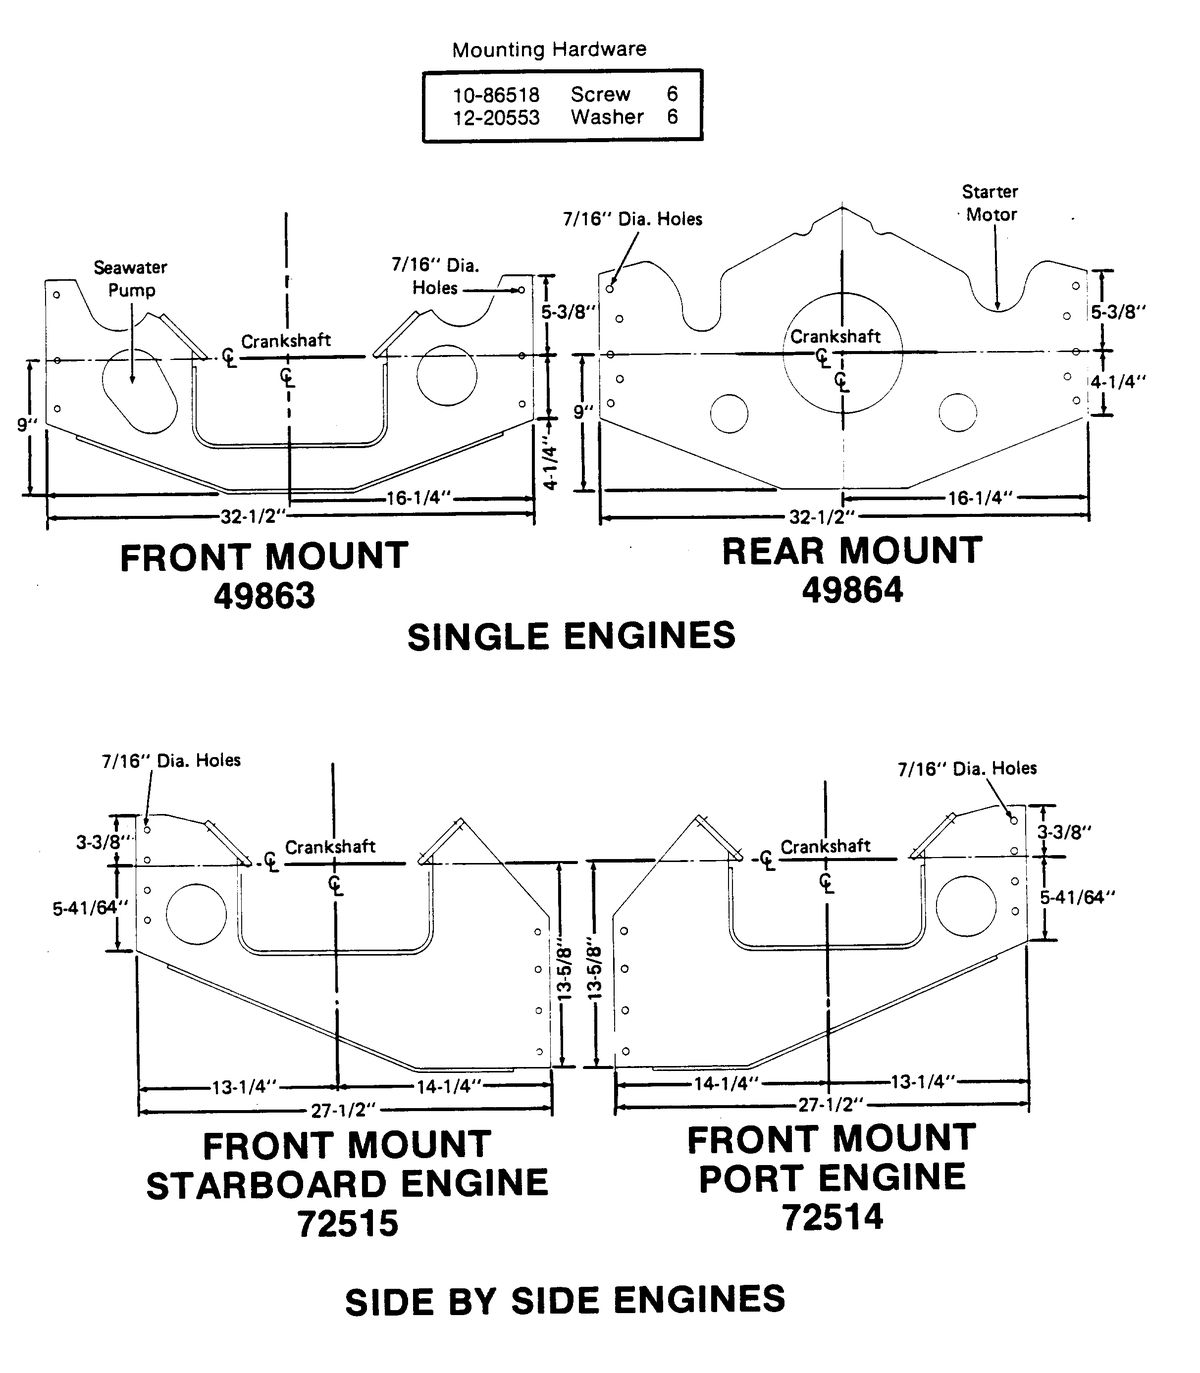 MERCRUISER 300 TEMPEST (MR/TR) ENGINE MOUNTING PLATE (SIDE BY SIDE ENGINES)